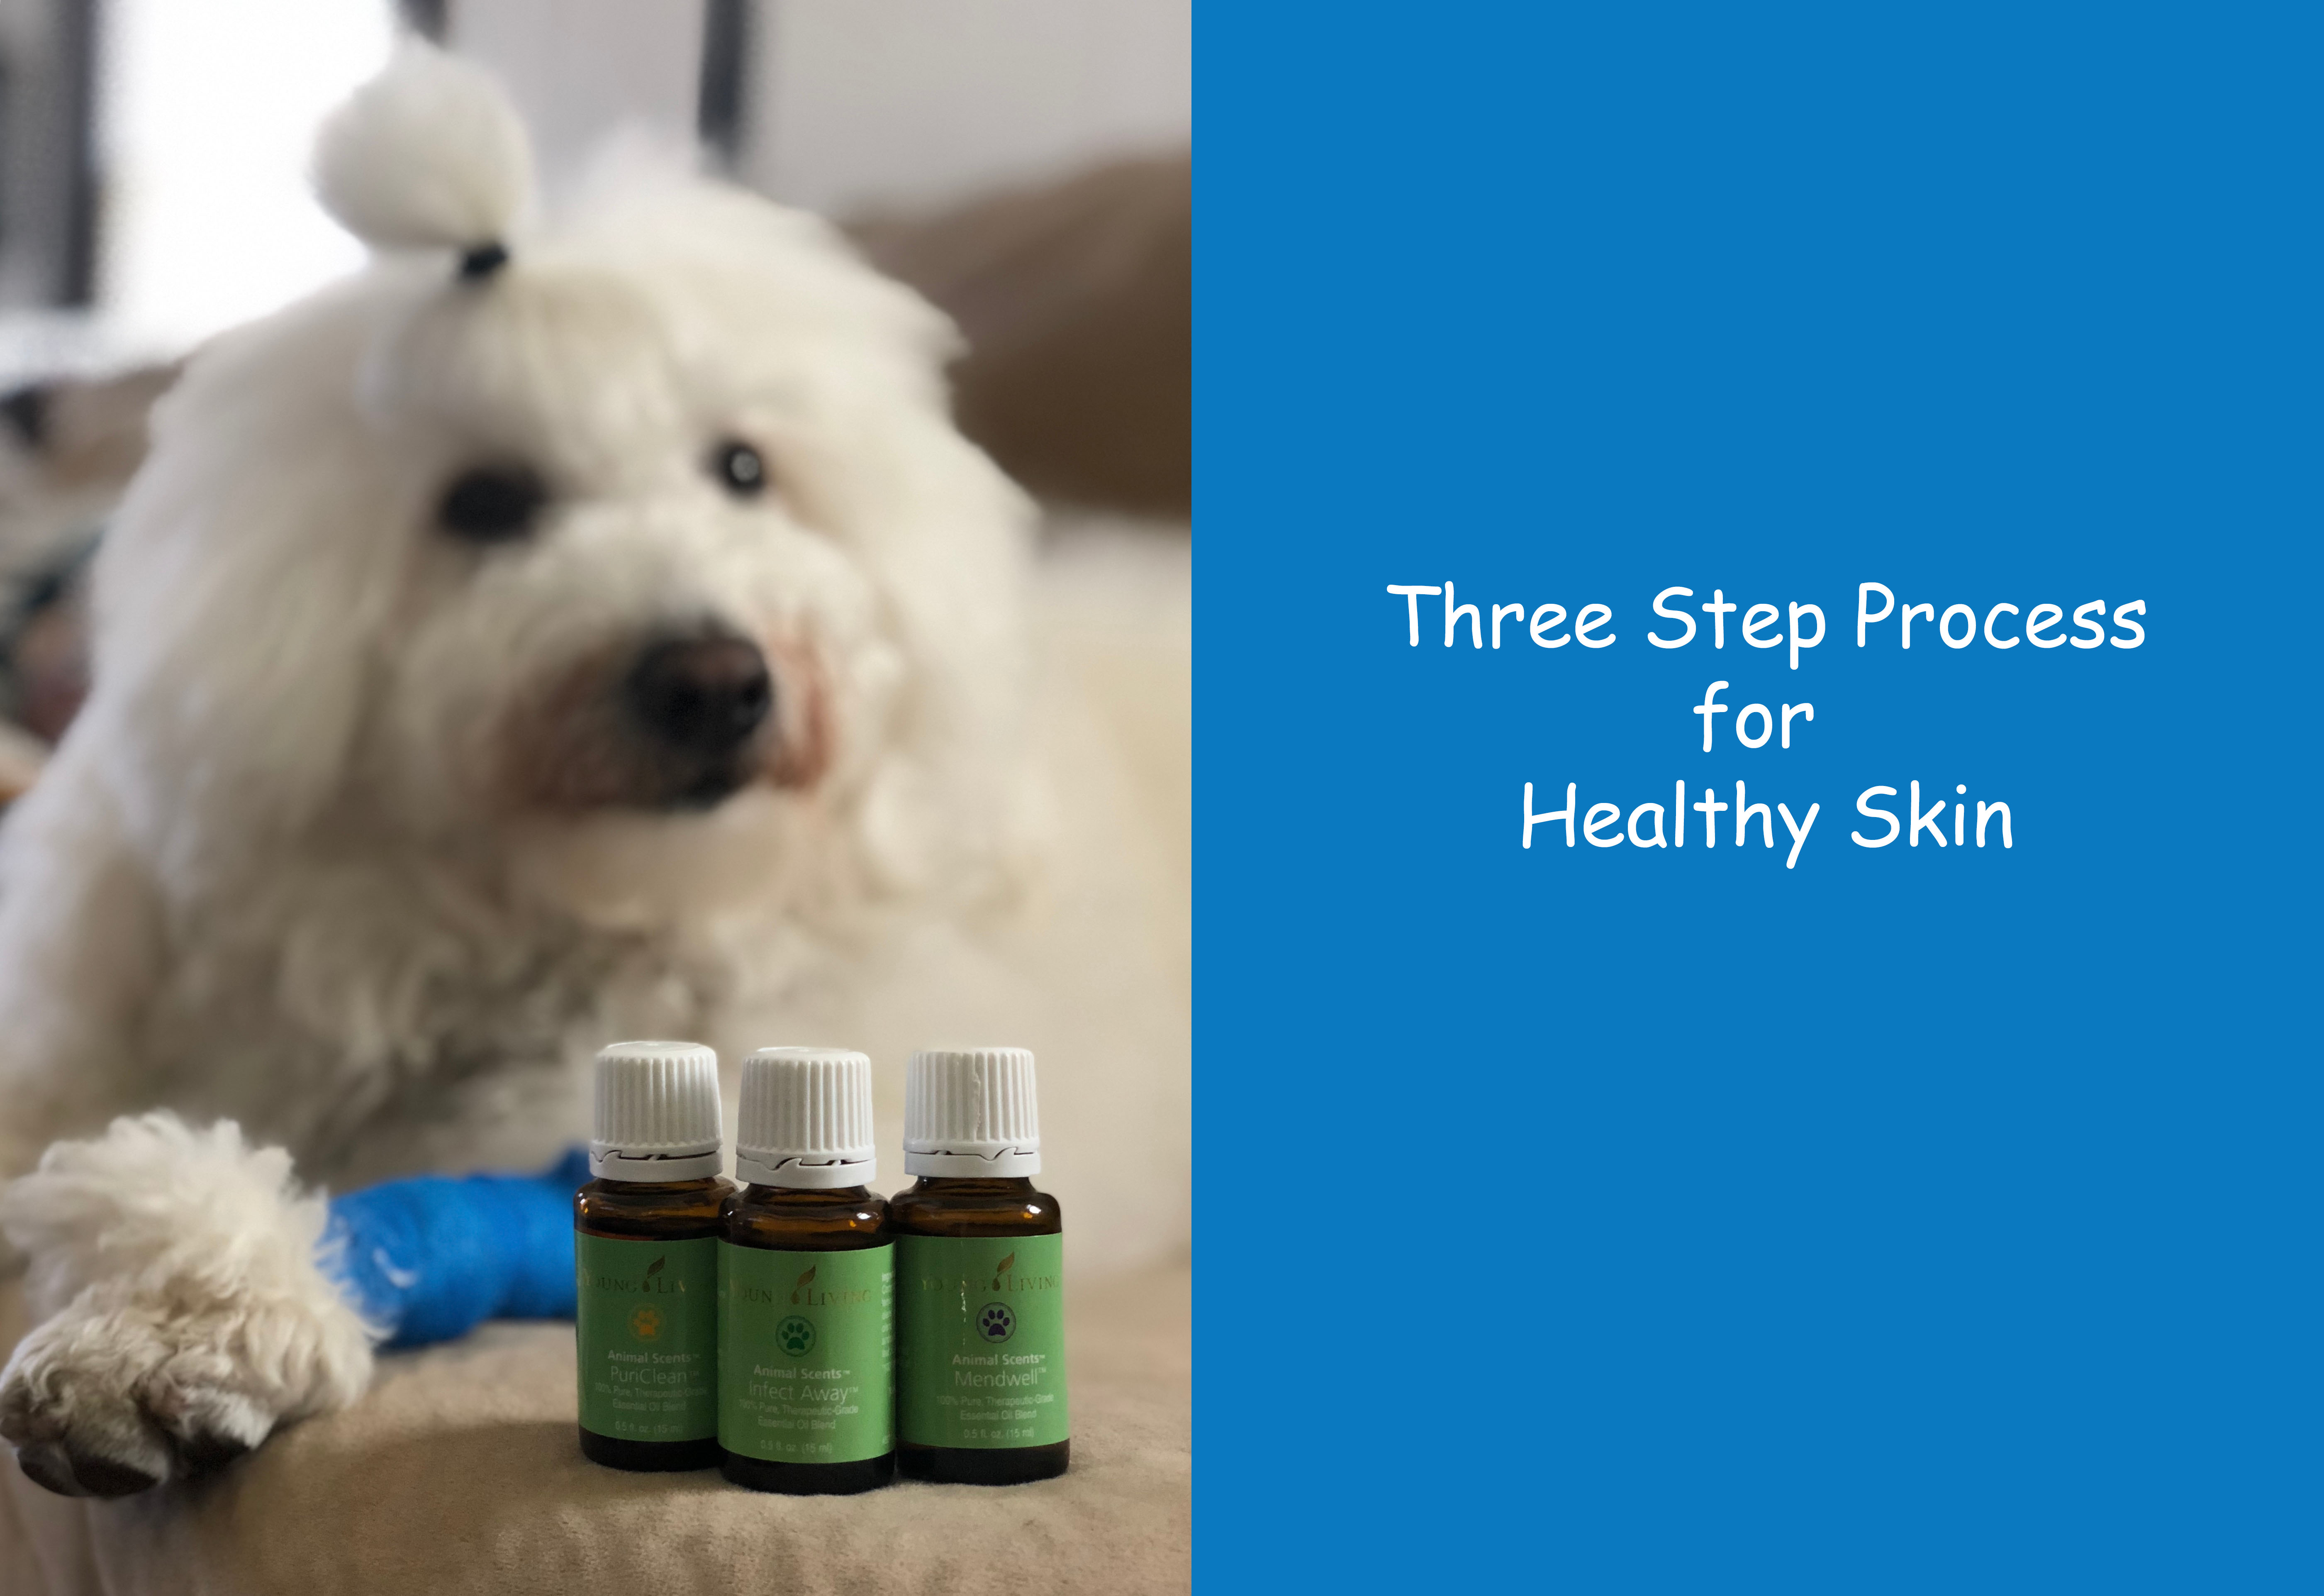 Healthy Skin For Your Pet – Stinson is Comfortable in His Own Skin